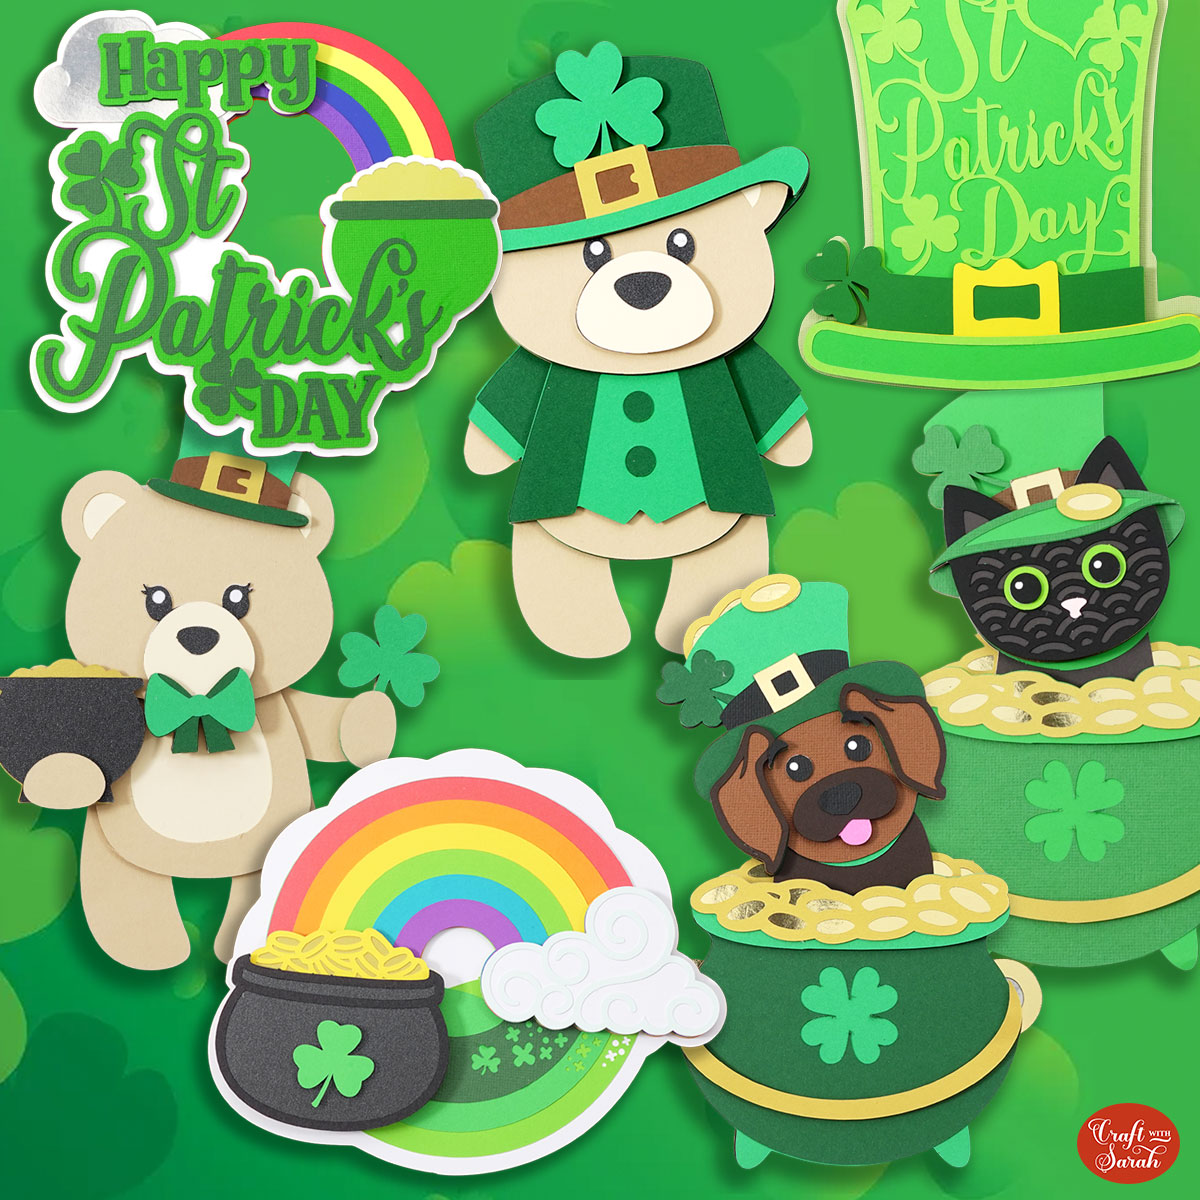 SVG cut files for St Patrick's Day